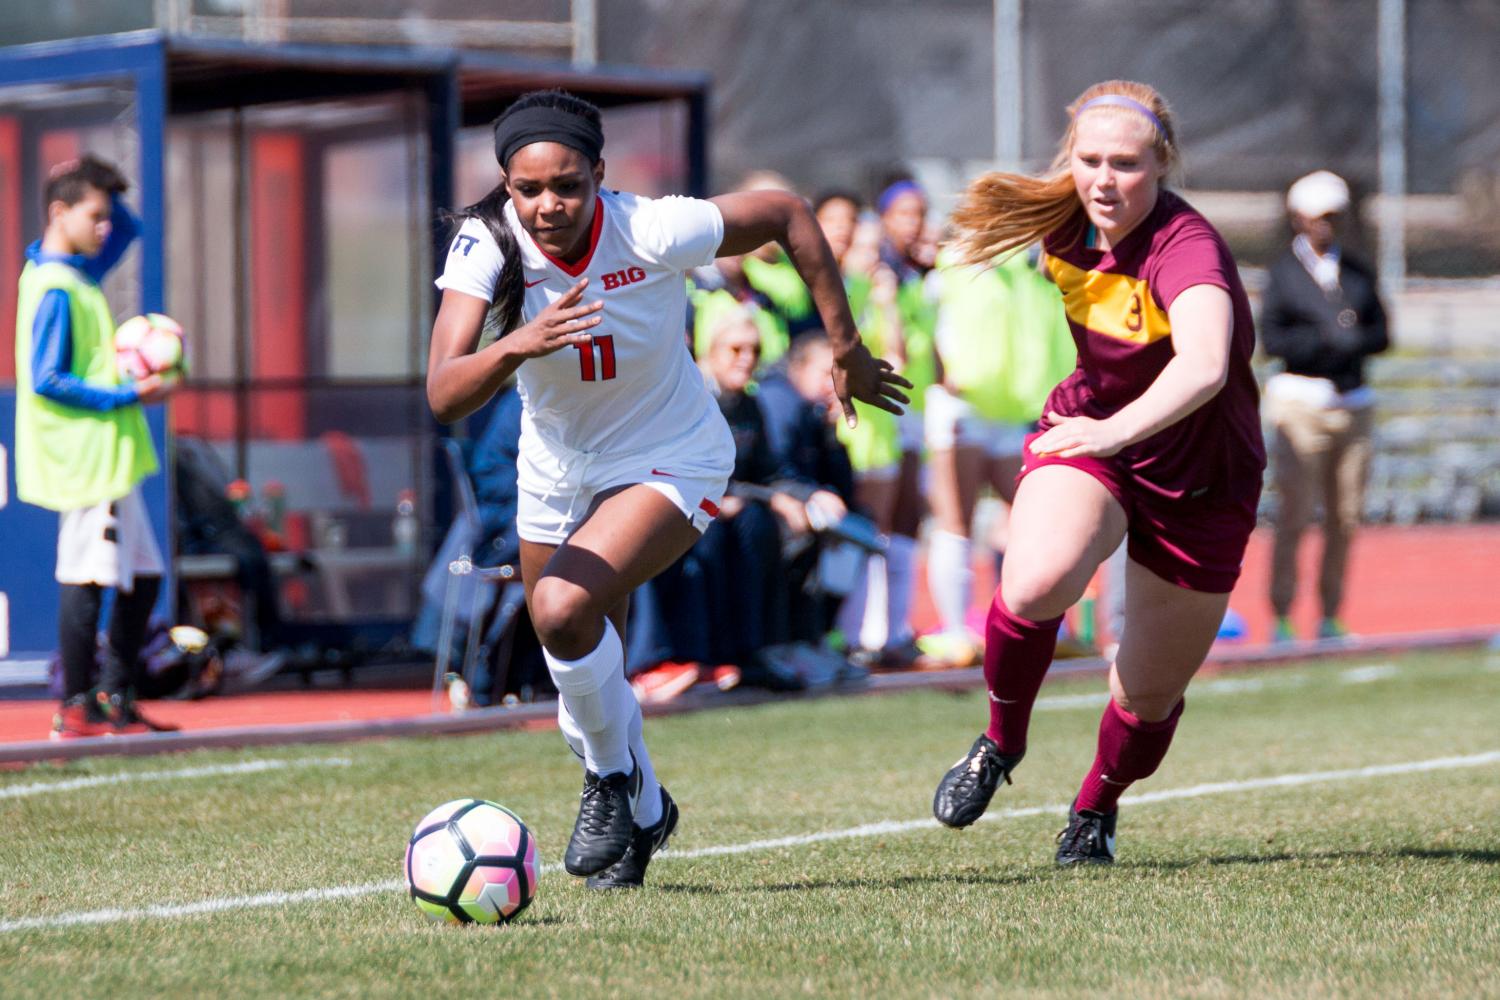 Illinois Patricia George (11) carries the ball up the field during the game against Loyola at the Illinois Soccer Stadium on Saturday, April 1. The Illini won 2-1.